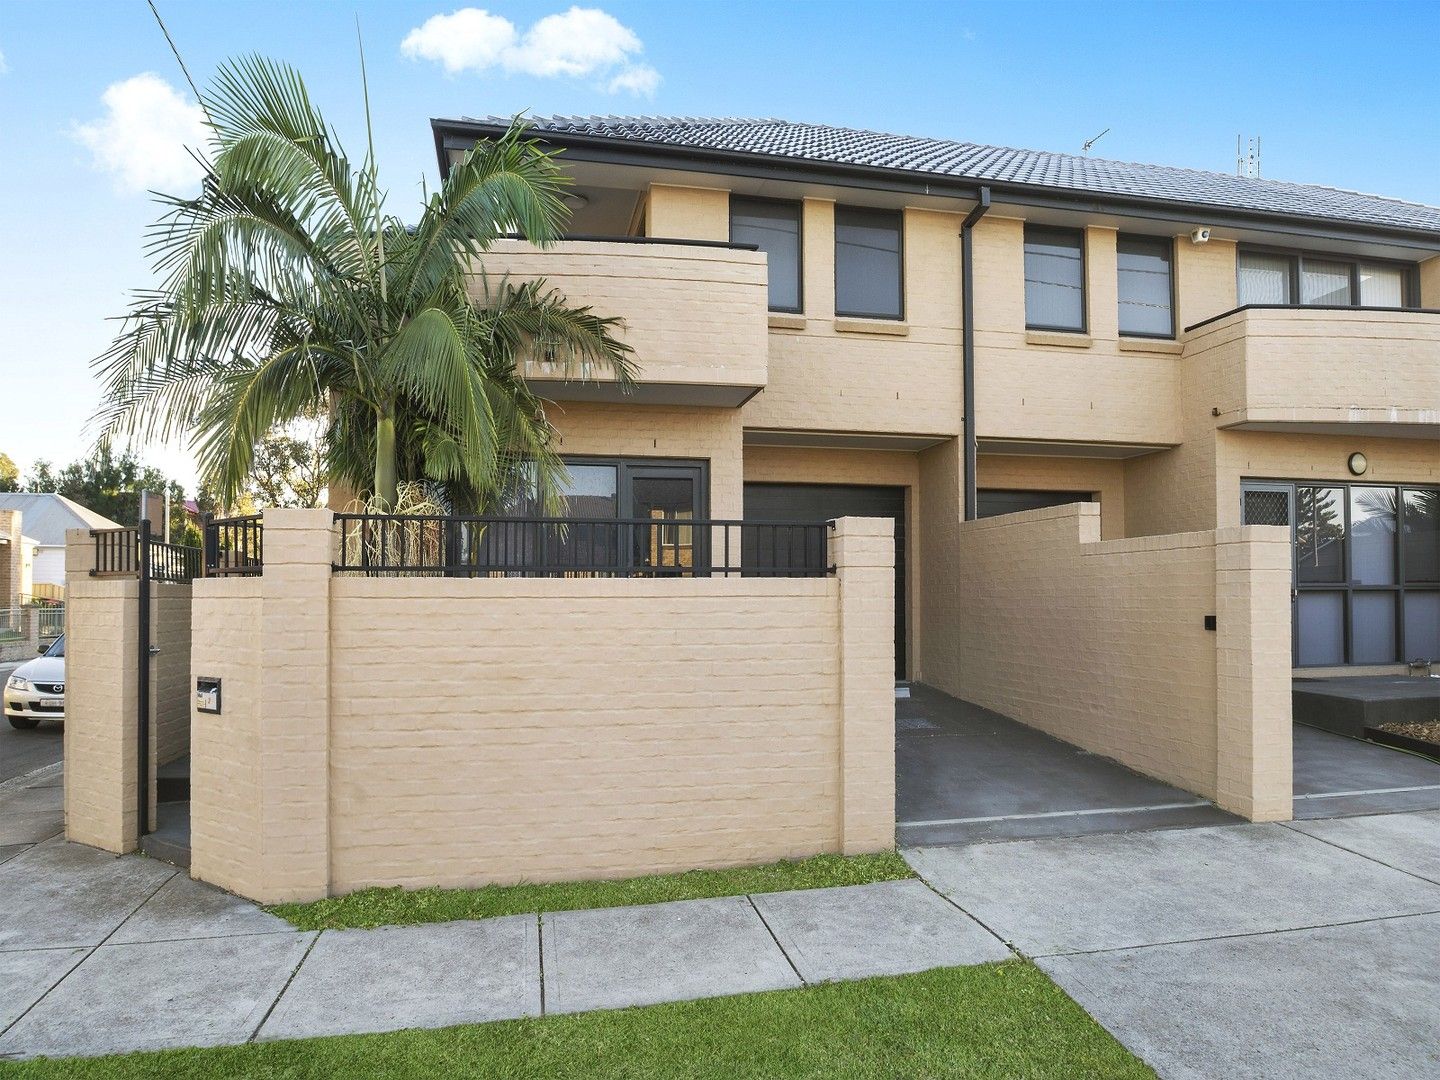 2 bedrooms Townhouse in 3/15 Lingard Street MEREWETHER NSW, 2291